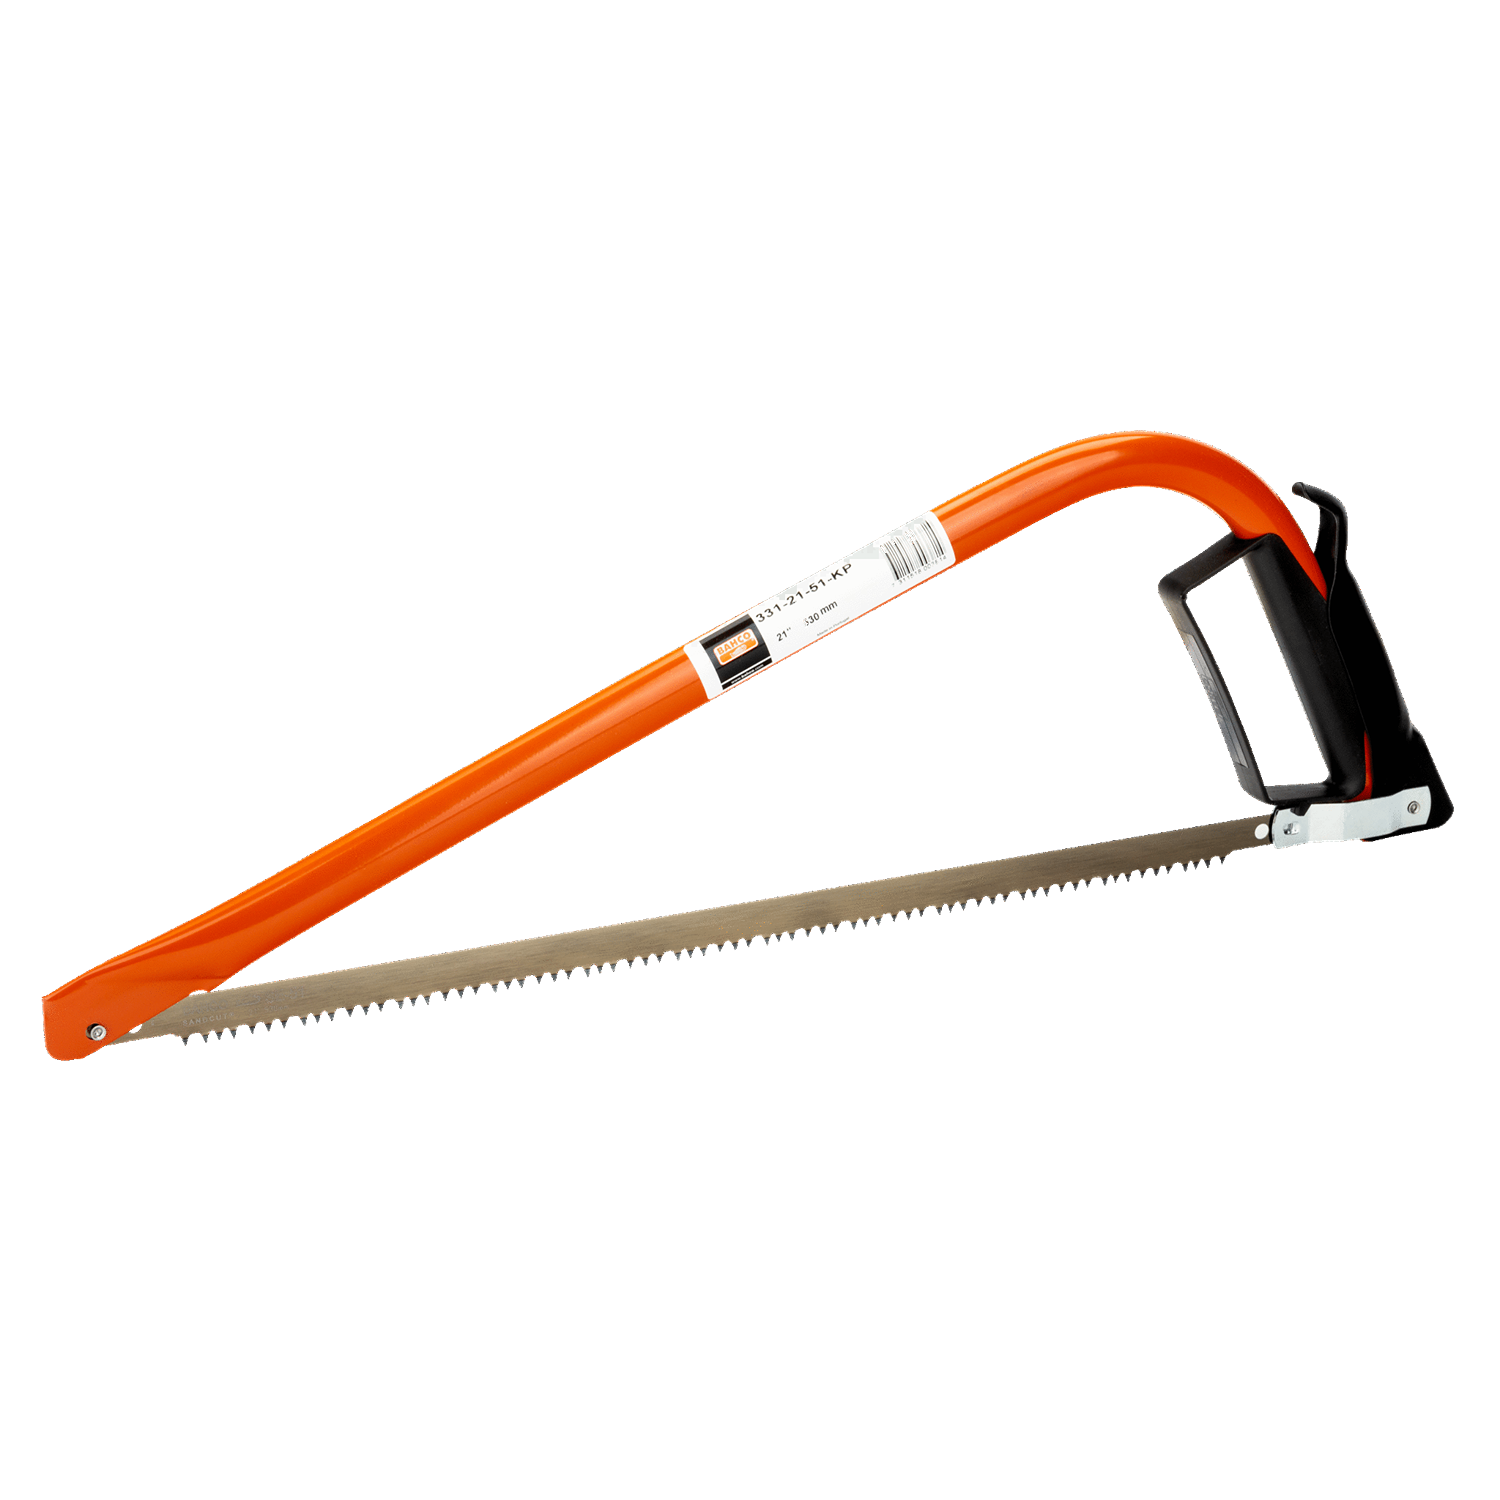 BAHCO 331-21 Pointed Bow Saw for Dry Wood 21” (BAHCO Tools) - Premium Pointed Bow Saw from BAHCO - Shop now at Yew Aik.